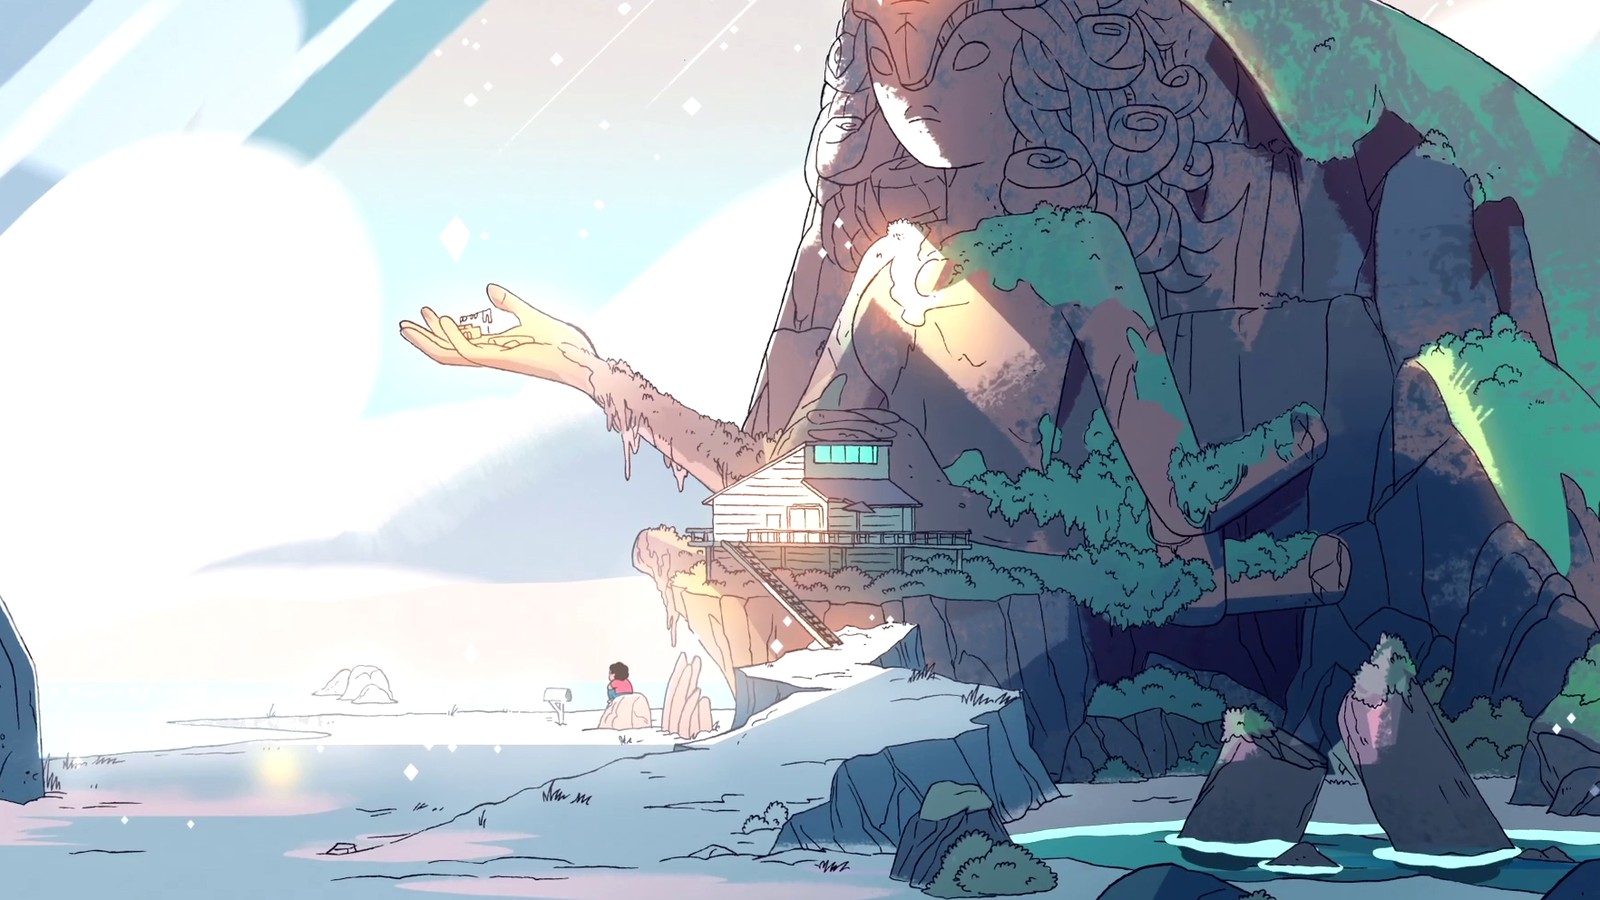 Steven Universe And The Hidden Messages In Built Environments The Atlantic